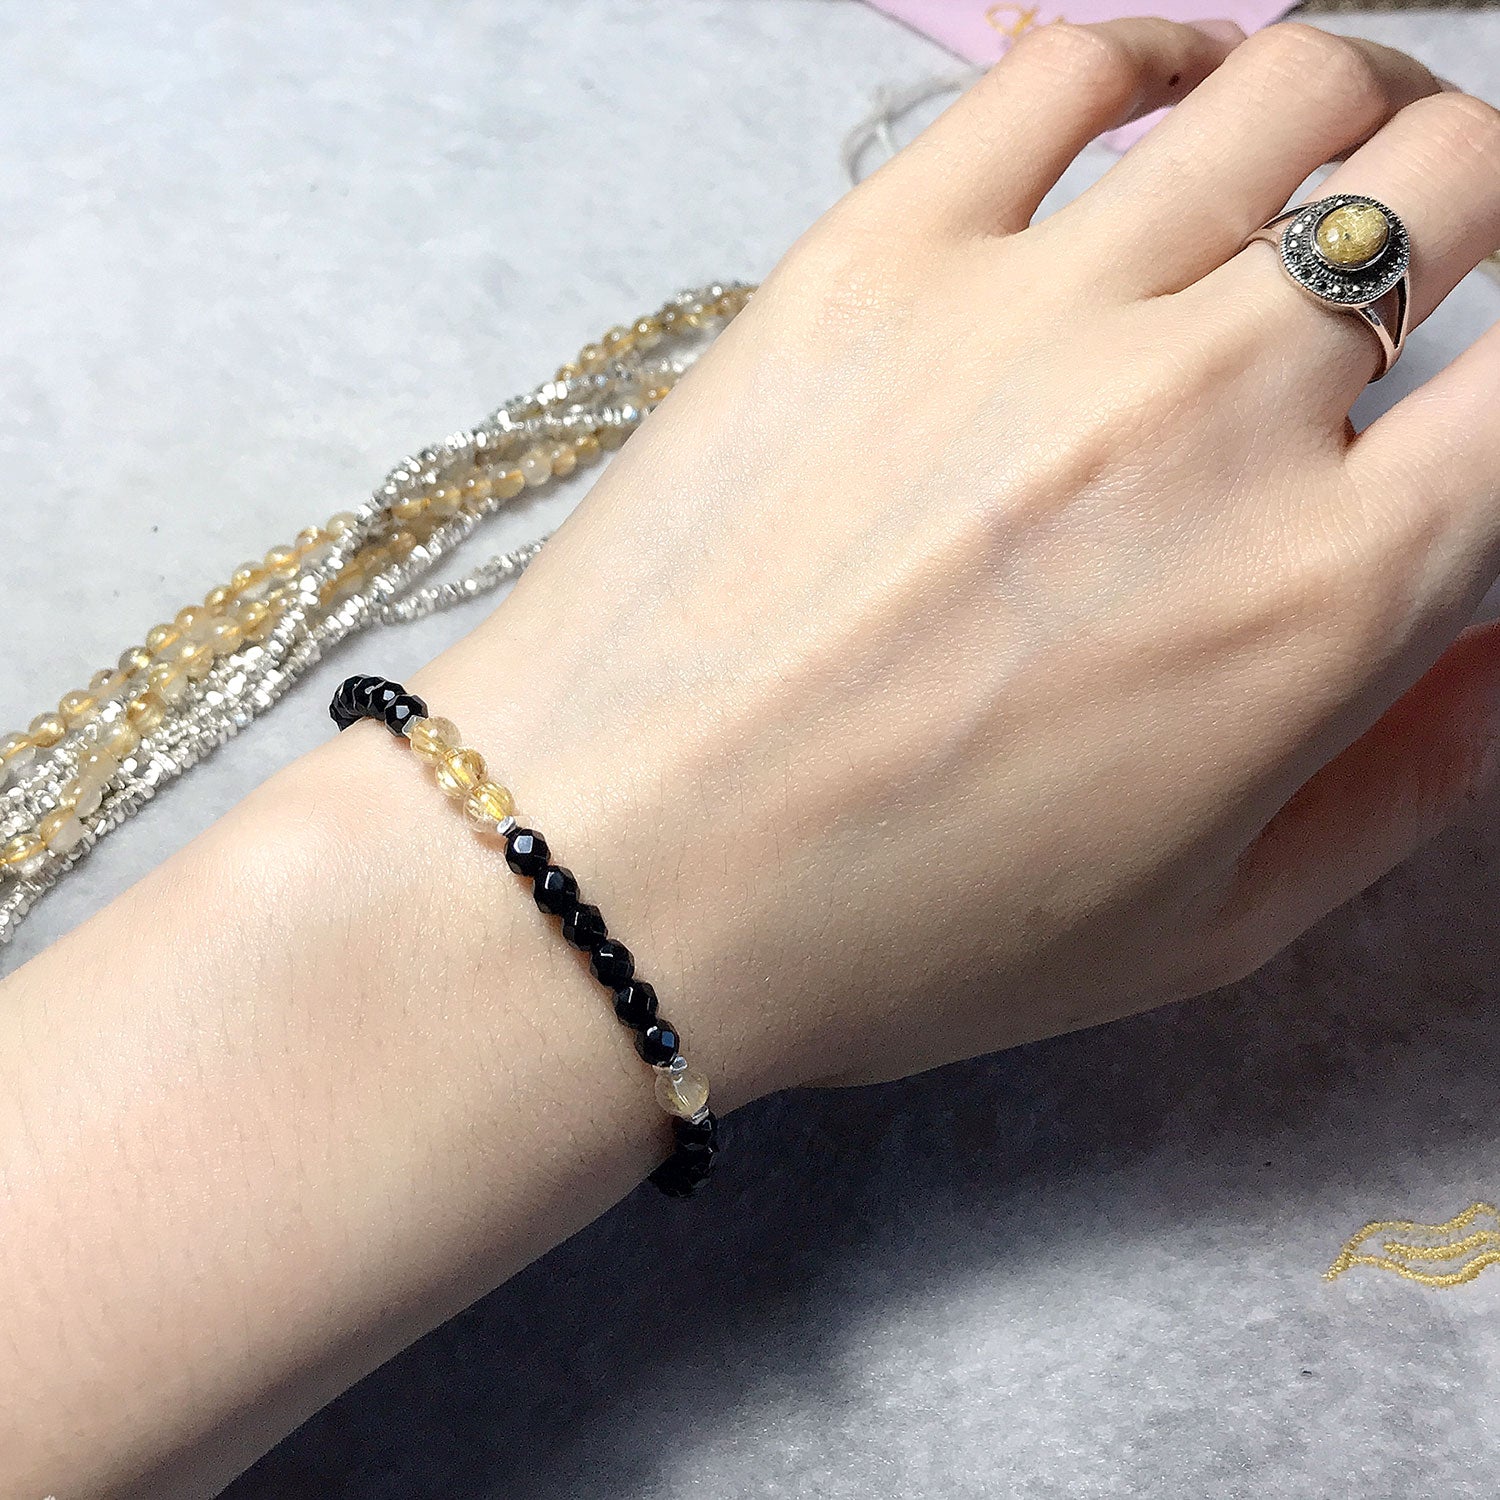 Simple Handmade Braided Bracelet | Natural High Grade AAA Golden Rutilated Quartz and Faceted Black Onyx | Happy Vibrant Healing Chakra Stones | Essential Jewelry for Meditation, Reiki, Awareness, Protection